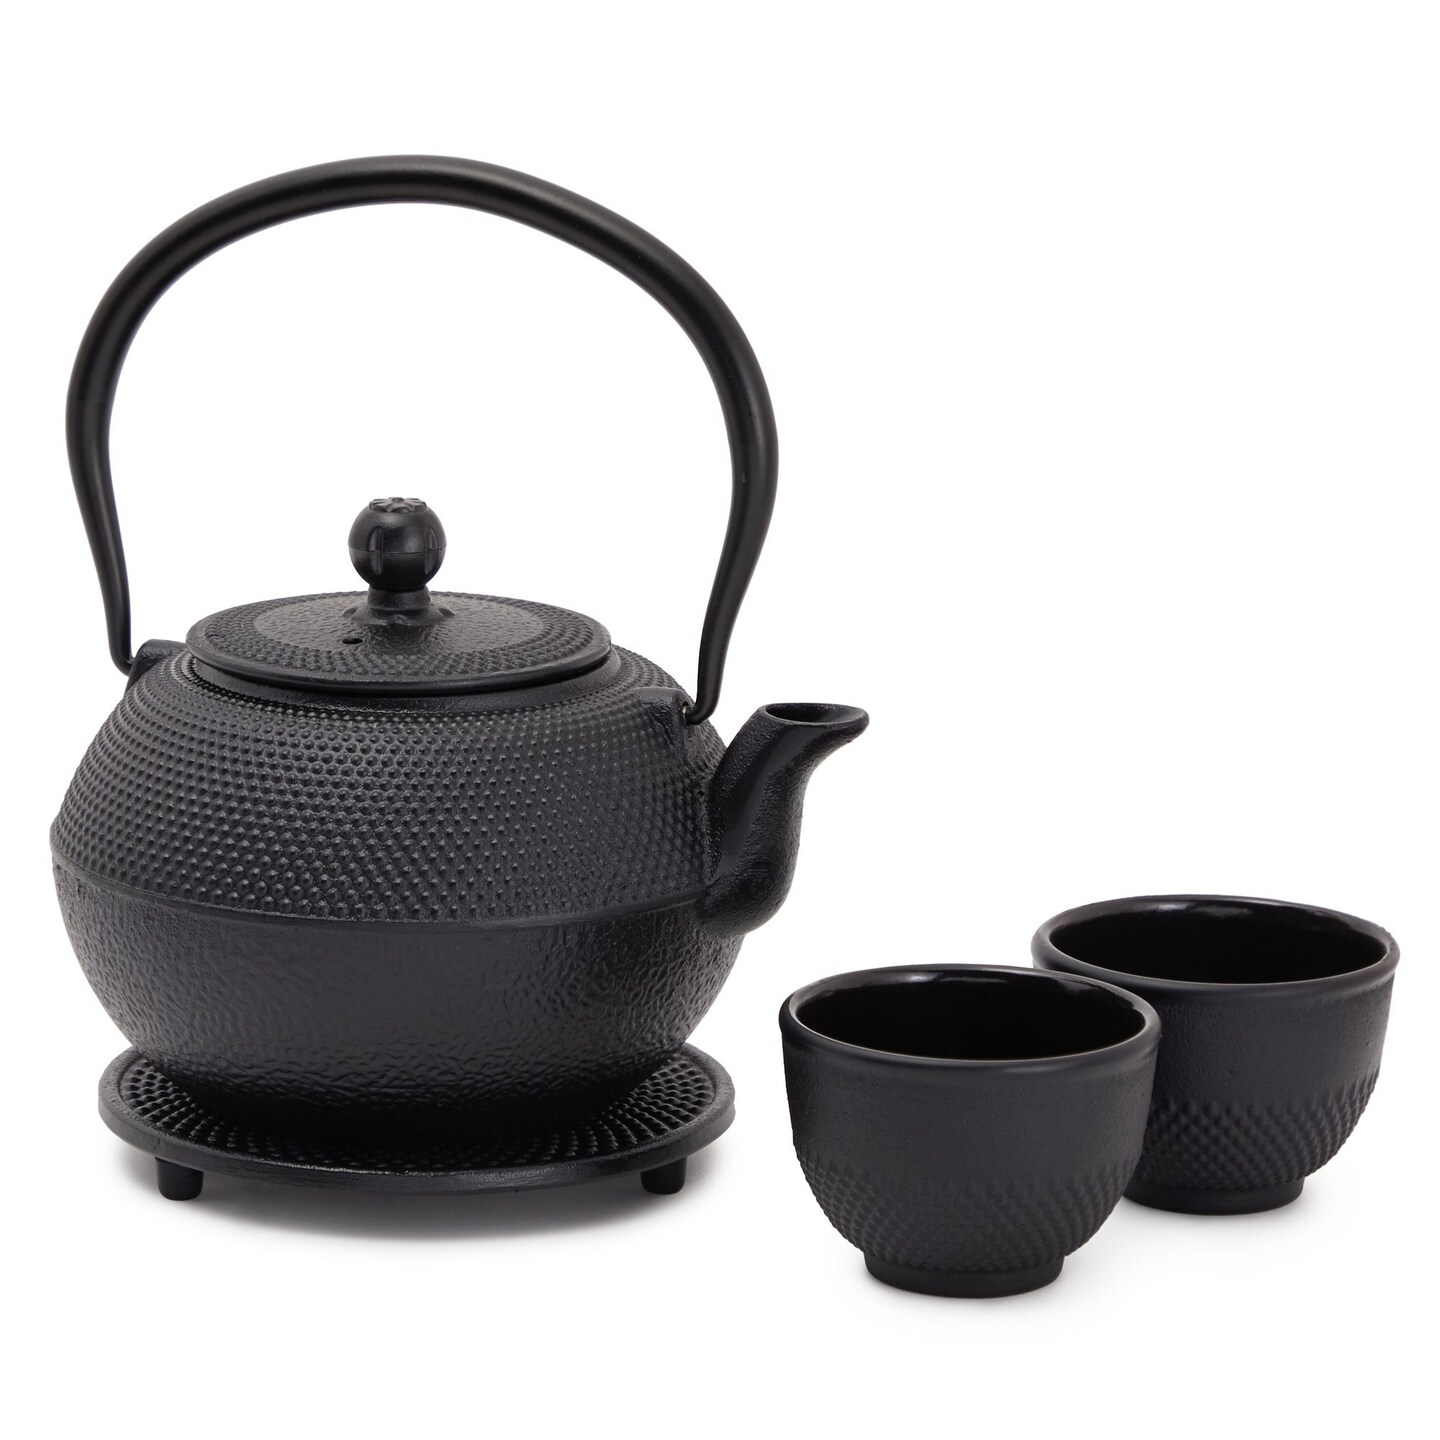 Cast Iron Tea Kettle for Stovetop - Japanese Tea Set with Warmer